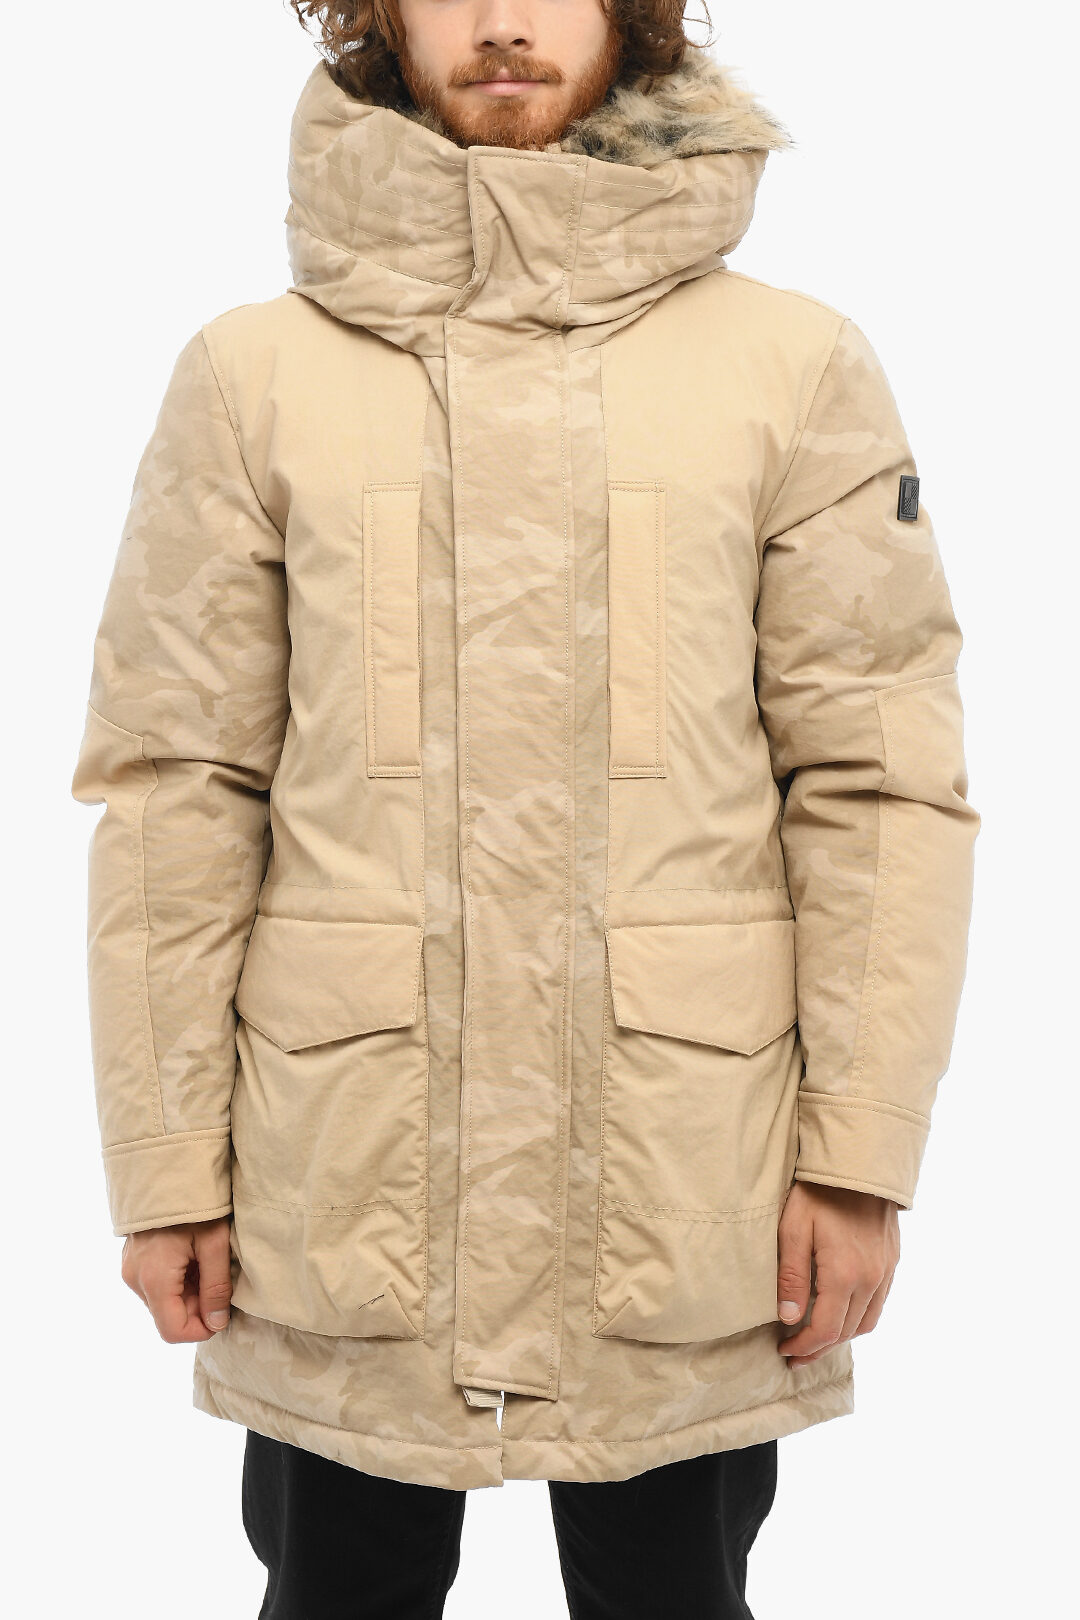 Solid Color Down Jacket with Camouflage Details